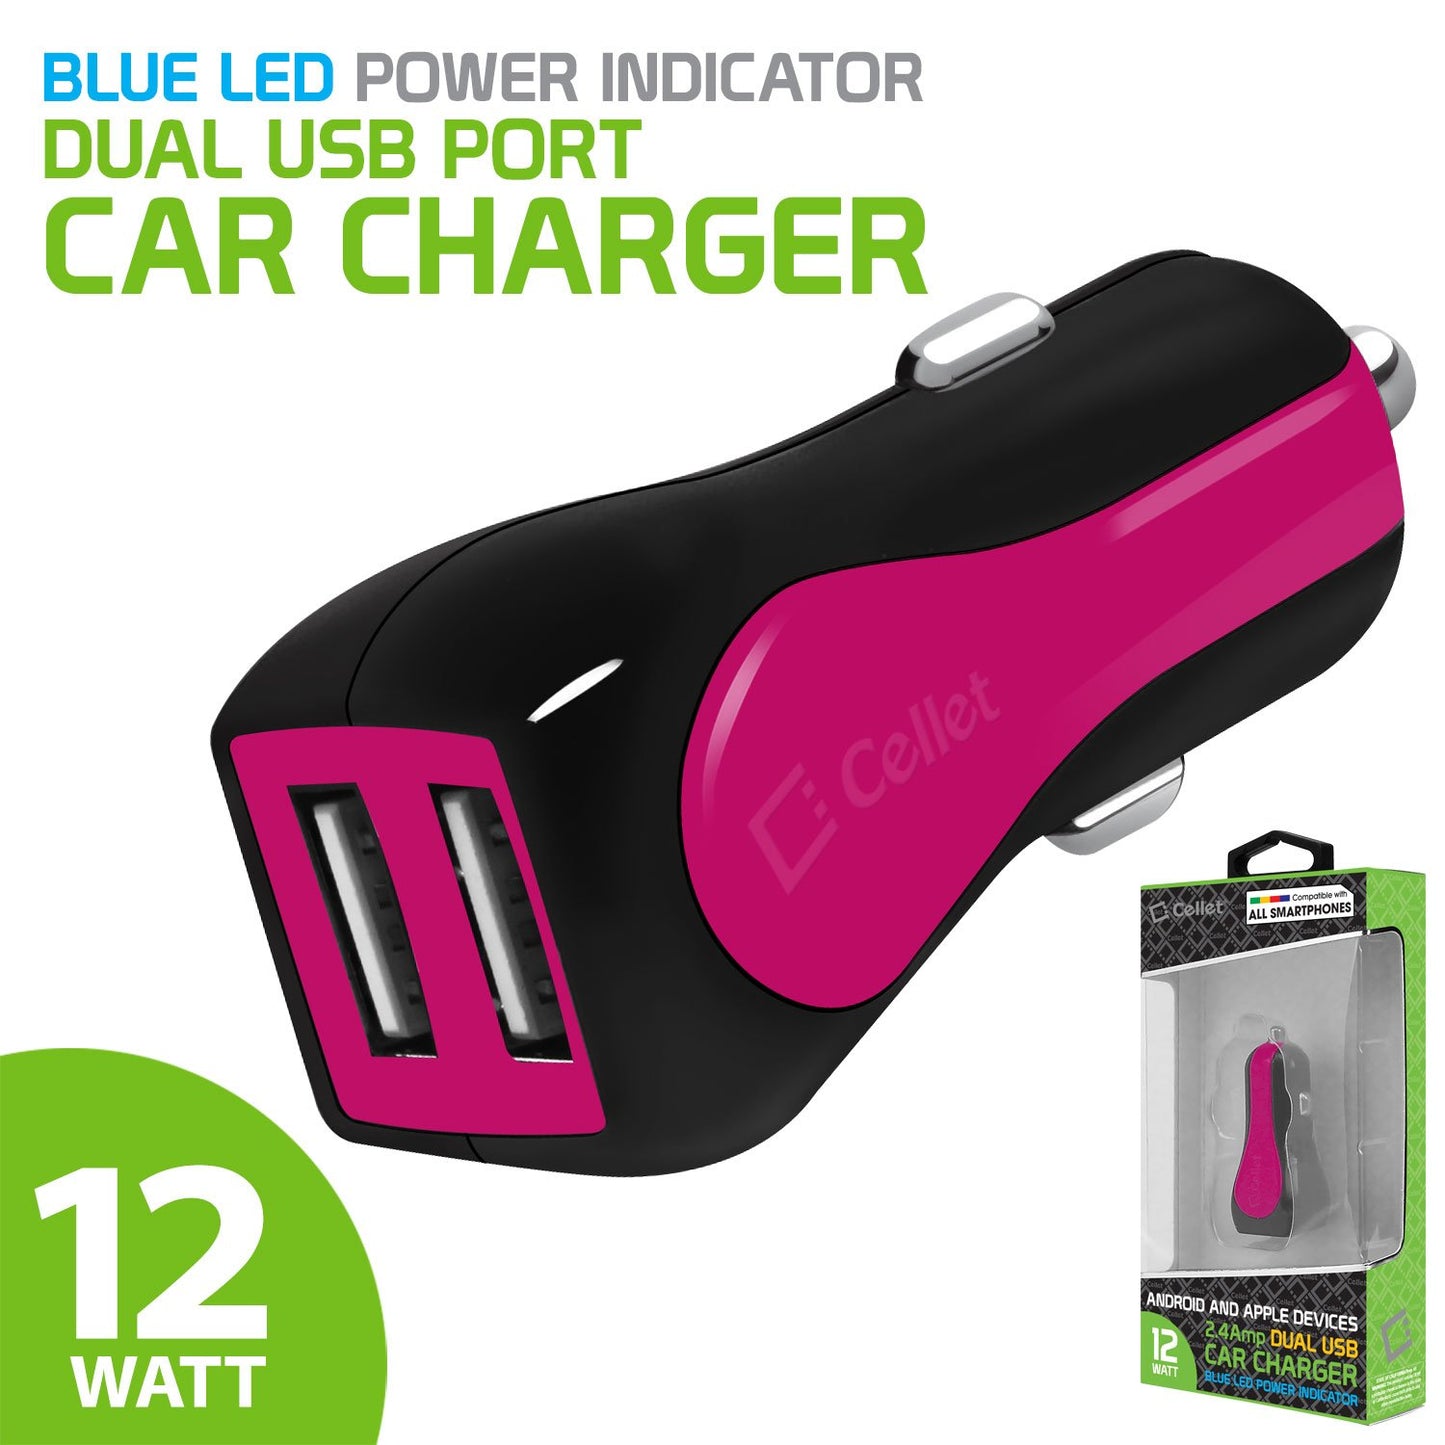 PUSBE21PK - Cellet Prism RapidCharge 12W 2.4A Dual USB Car Charger for Android and Apple Devices - Pink